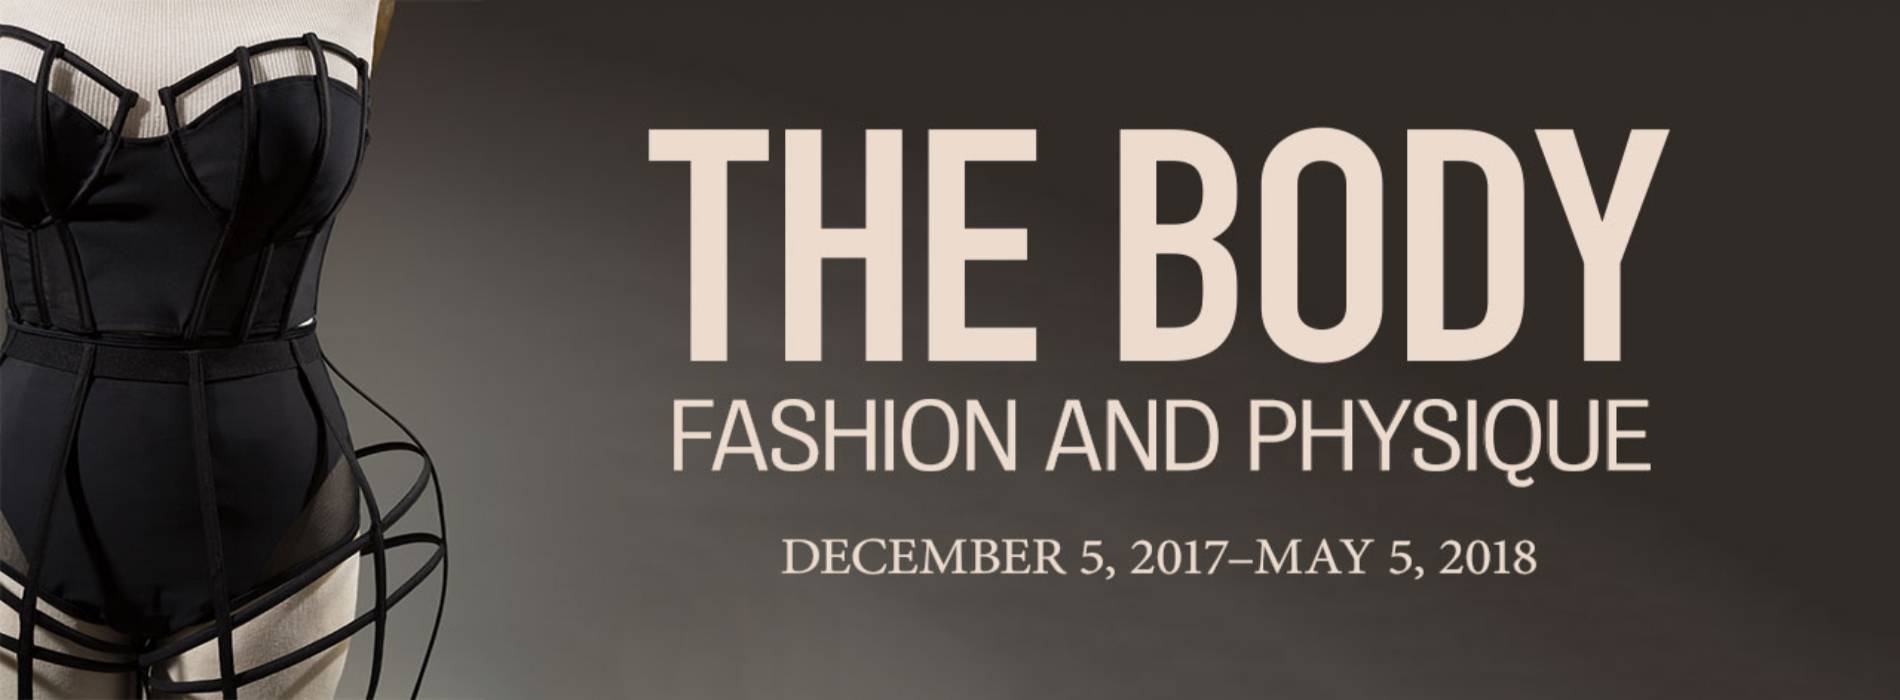 The Body: Fashion and Physique